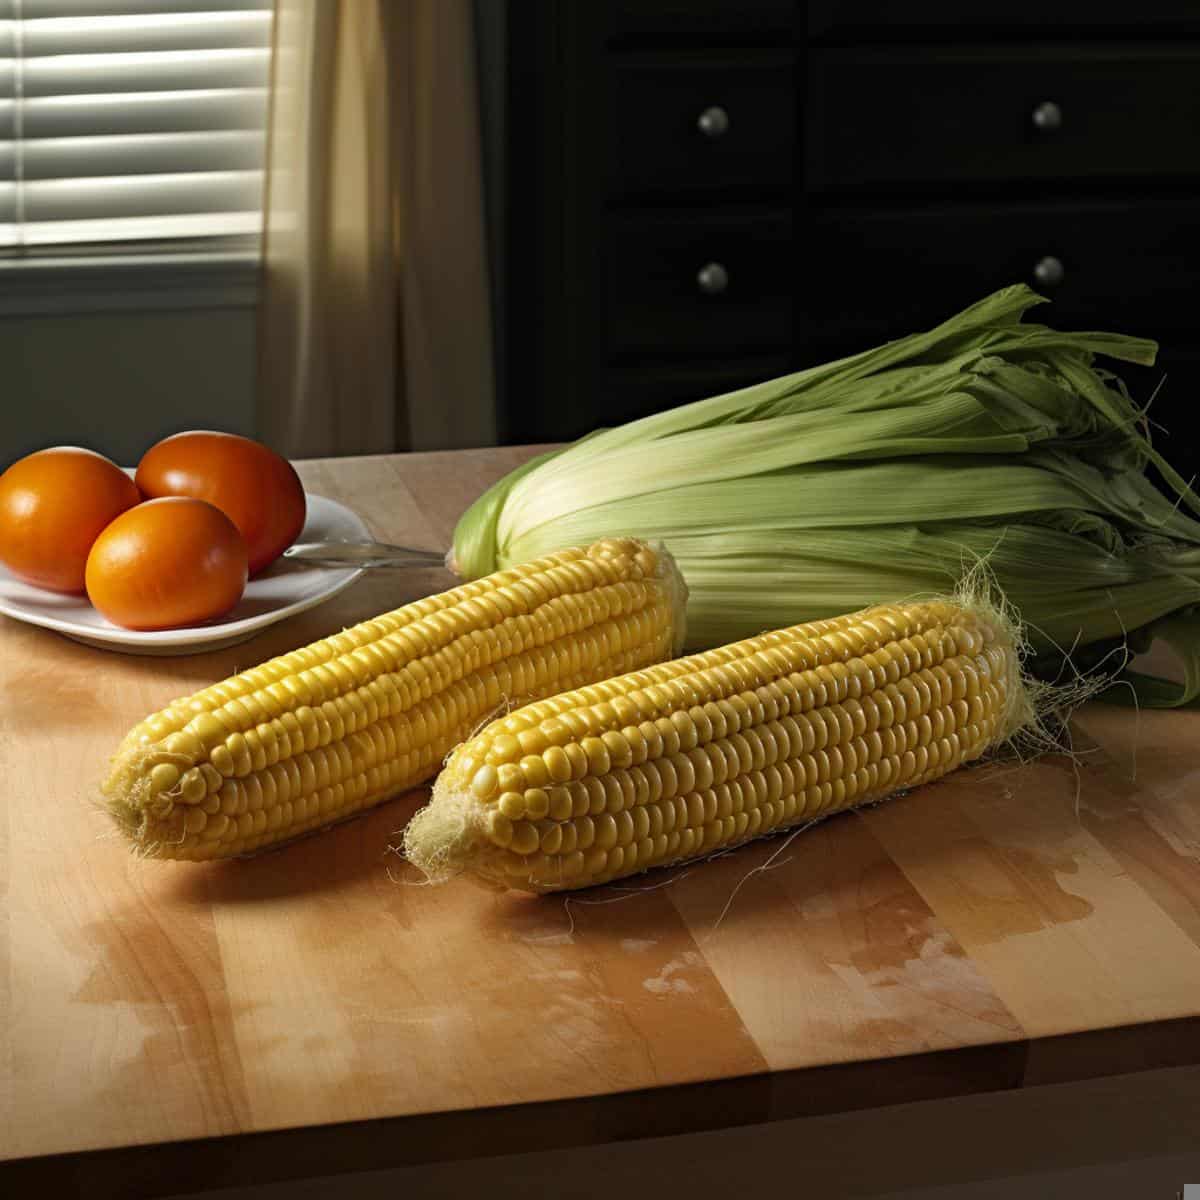 Corn on a kitchen counter